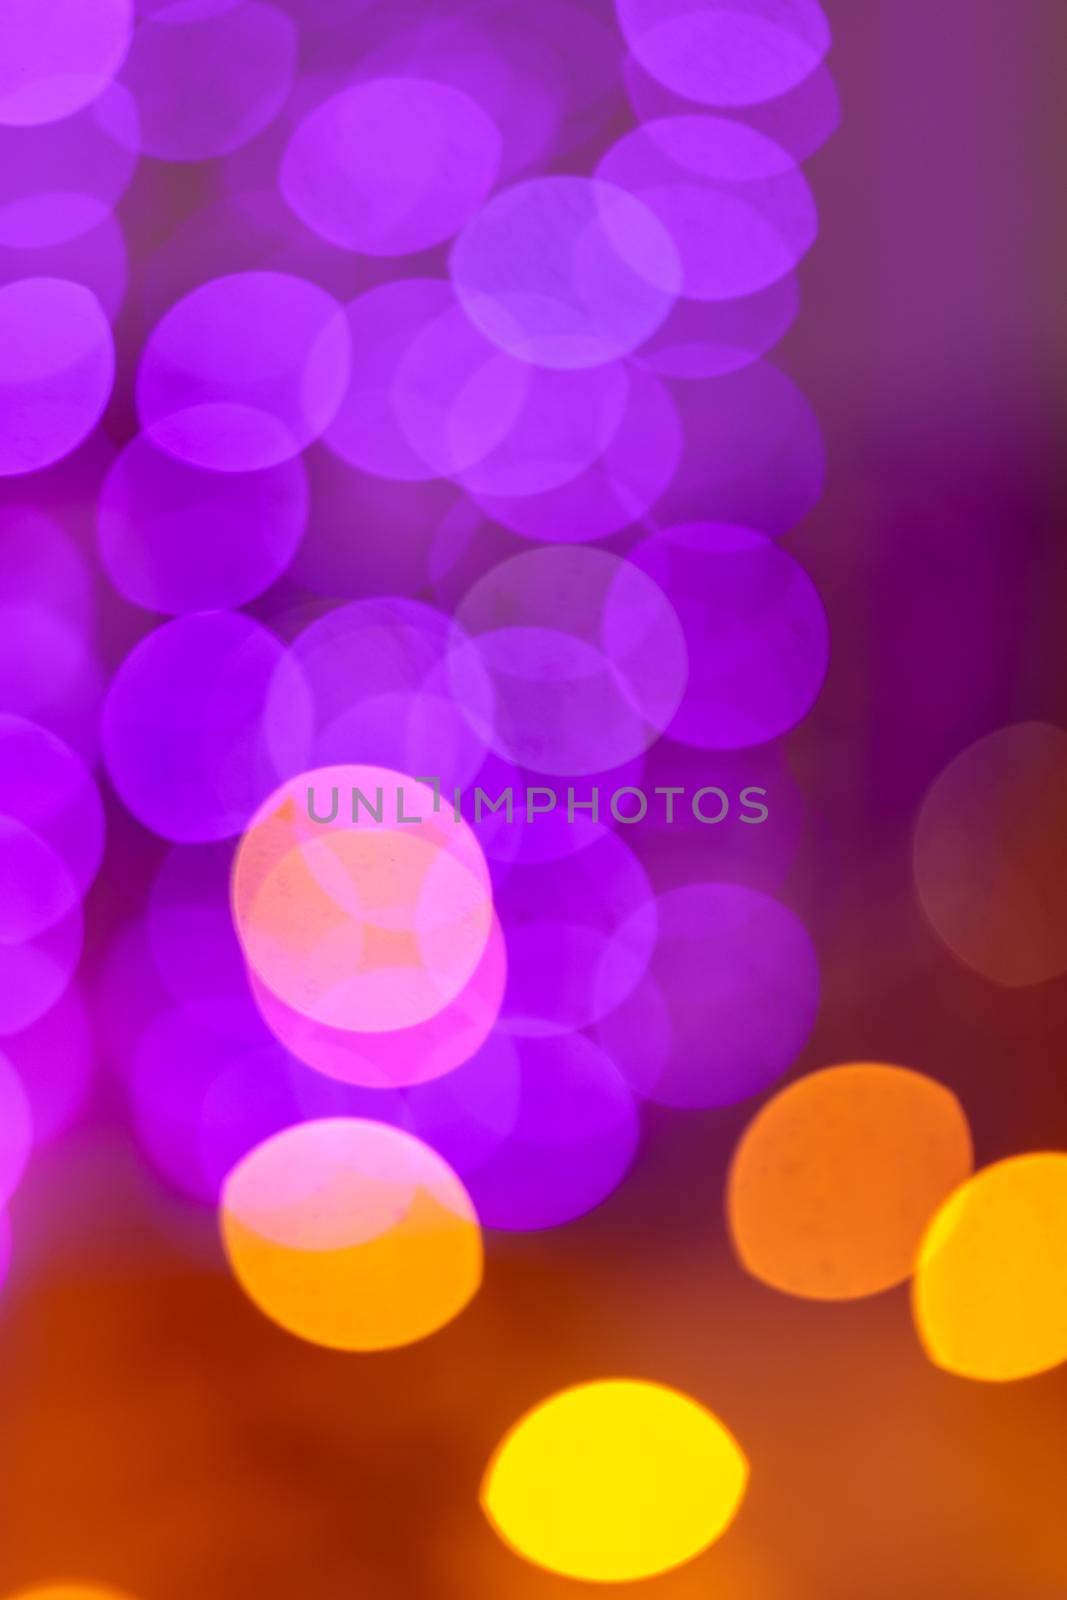 Pink bokeh on a lilac, purple background. The light is out of focus.